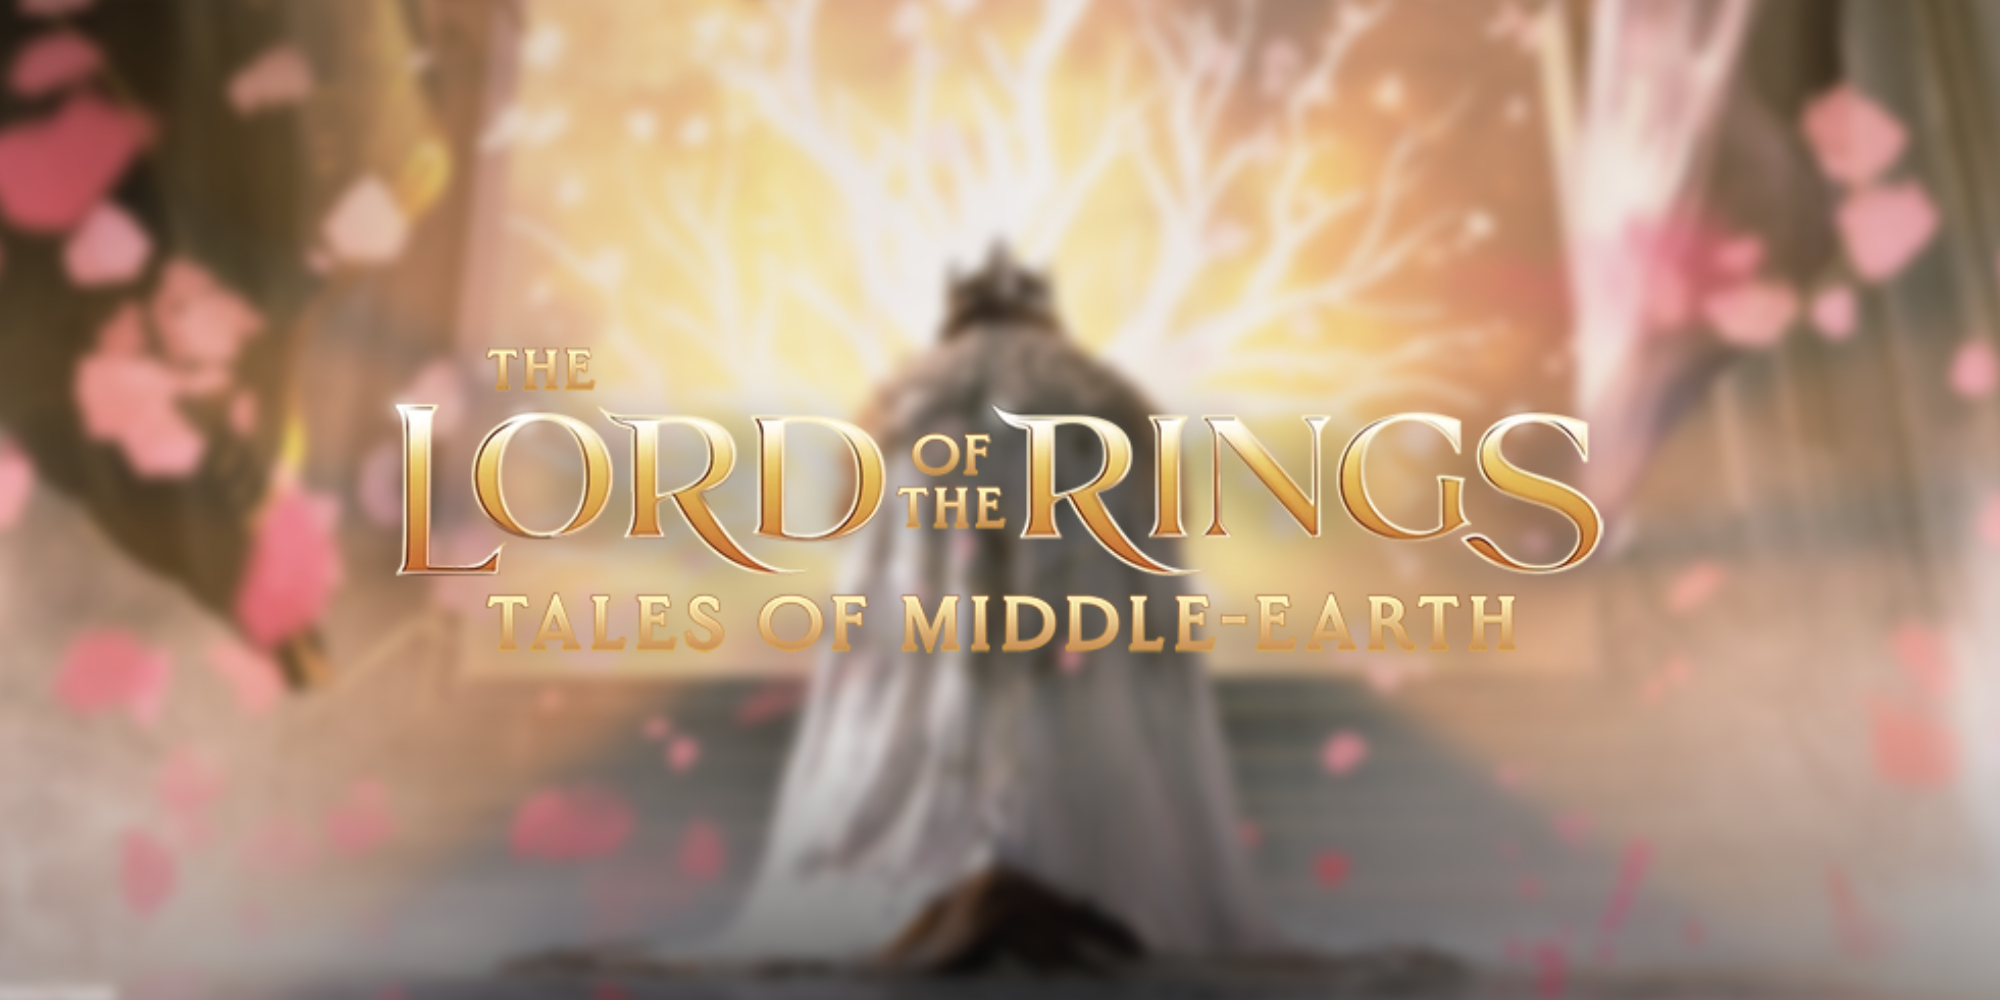 Narrative Design: The Lord of the Rings: Tales of Middle-Earth